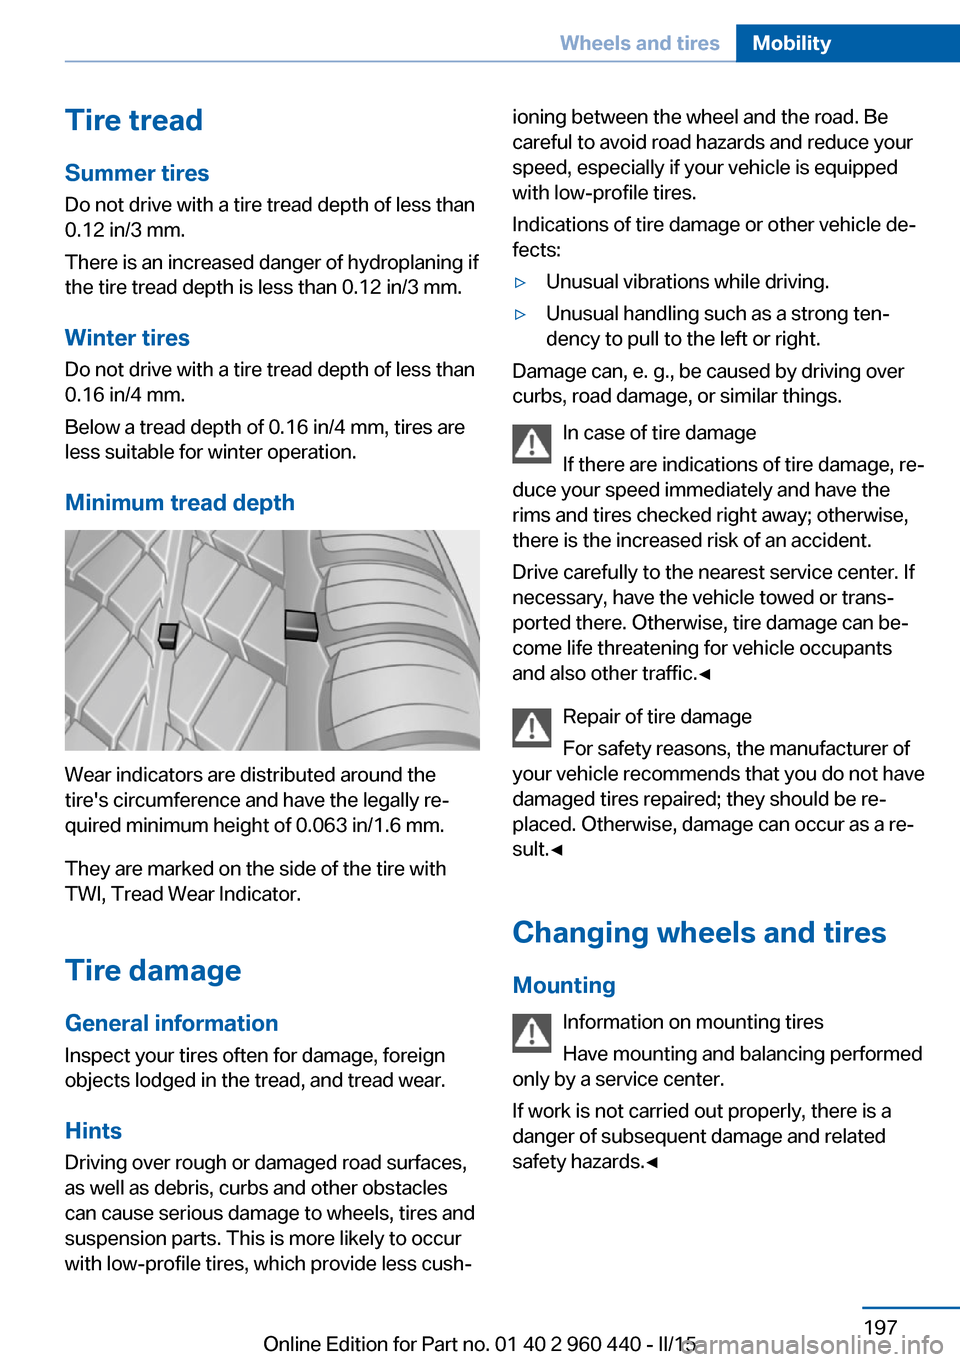 BMW 3 SERIES SEDAN 2015 F30 Owners Guide Tire treadSummer tires
Do not drive with a tire tread depth of less than
0.12 in/3 mm.
There is an increased danger of hydroplaning if
the tire tread depth is less than 0.12 in/3 mm.
Winter tires
Do n